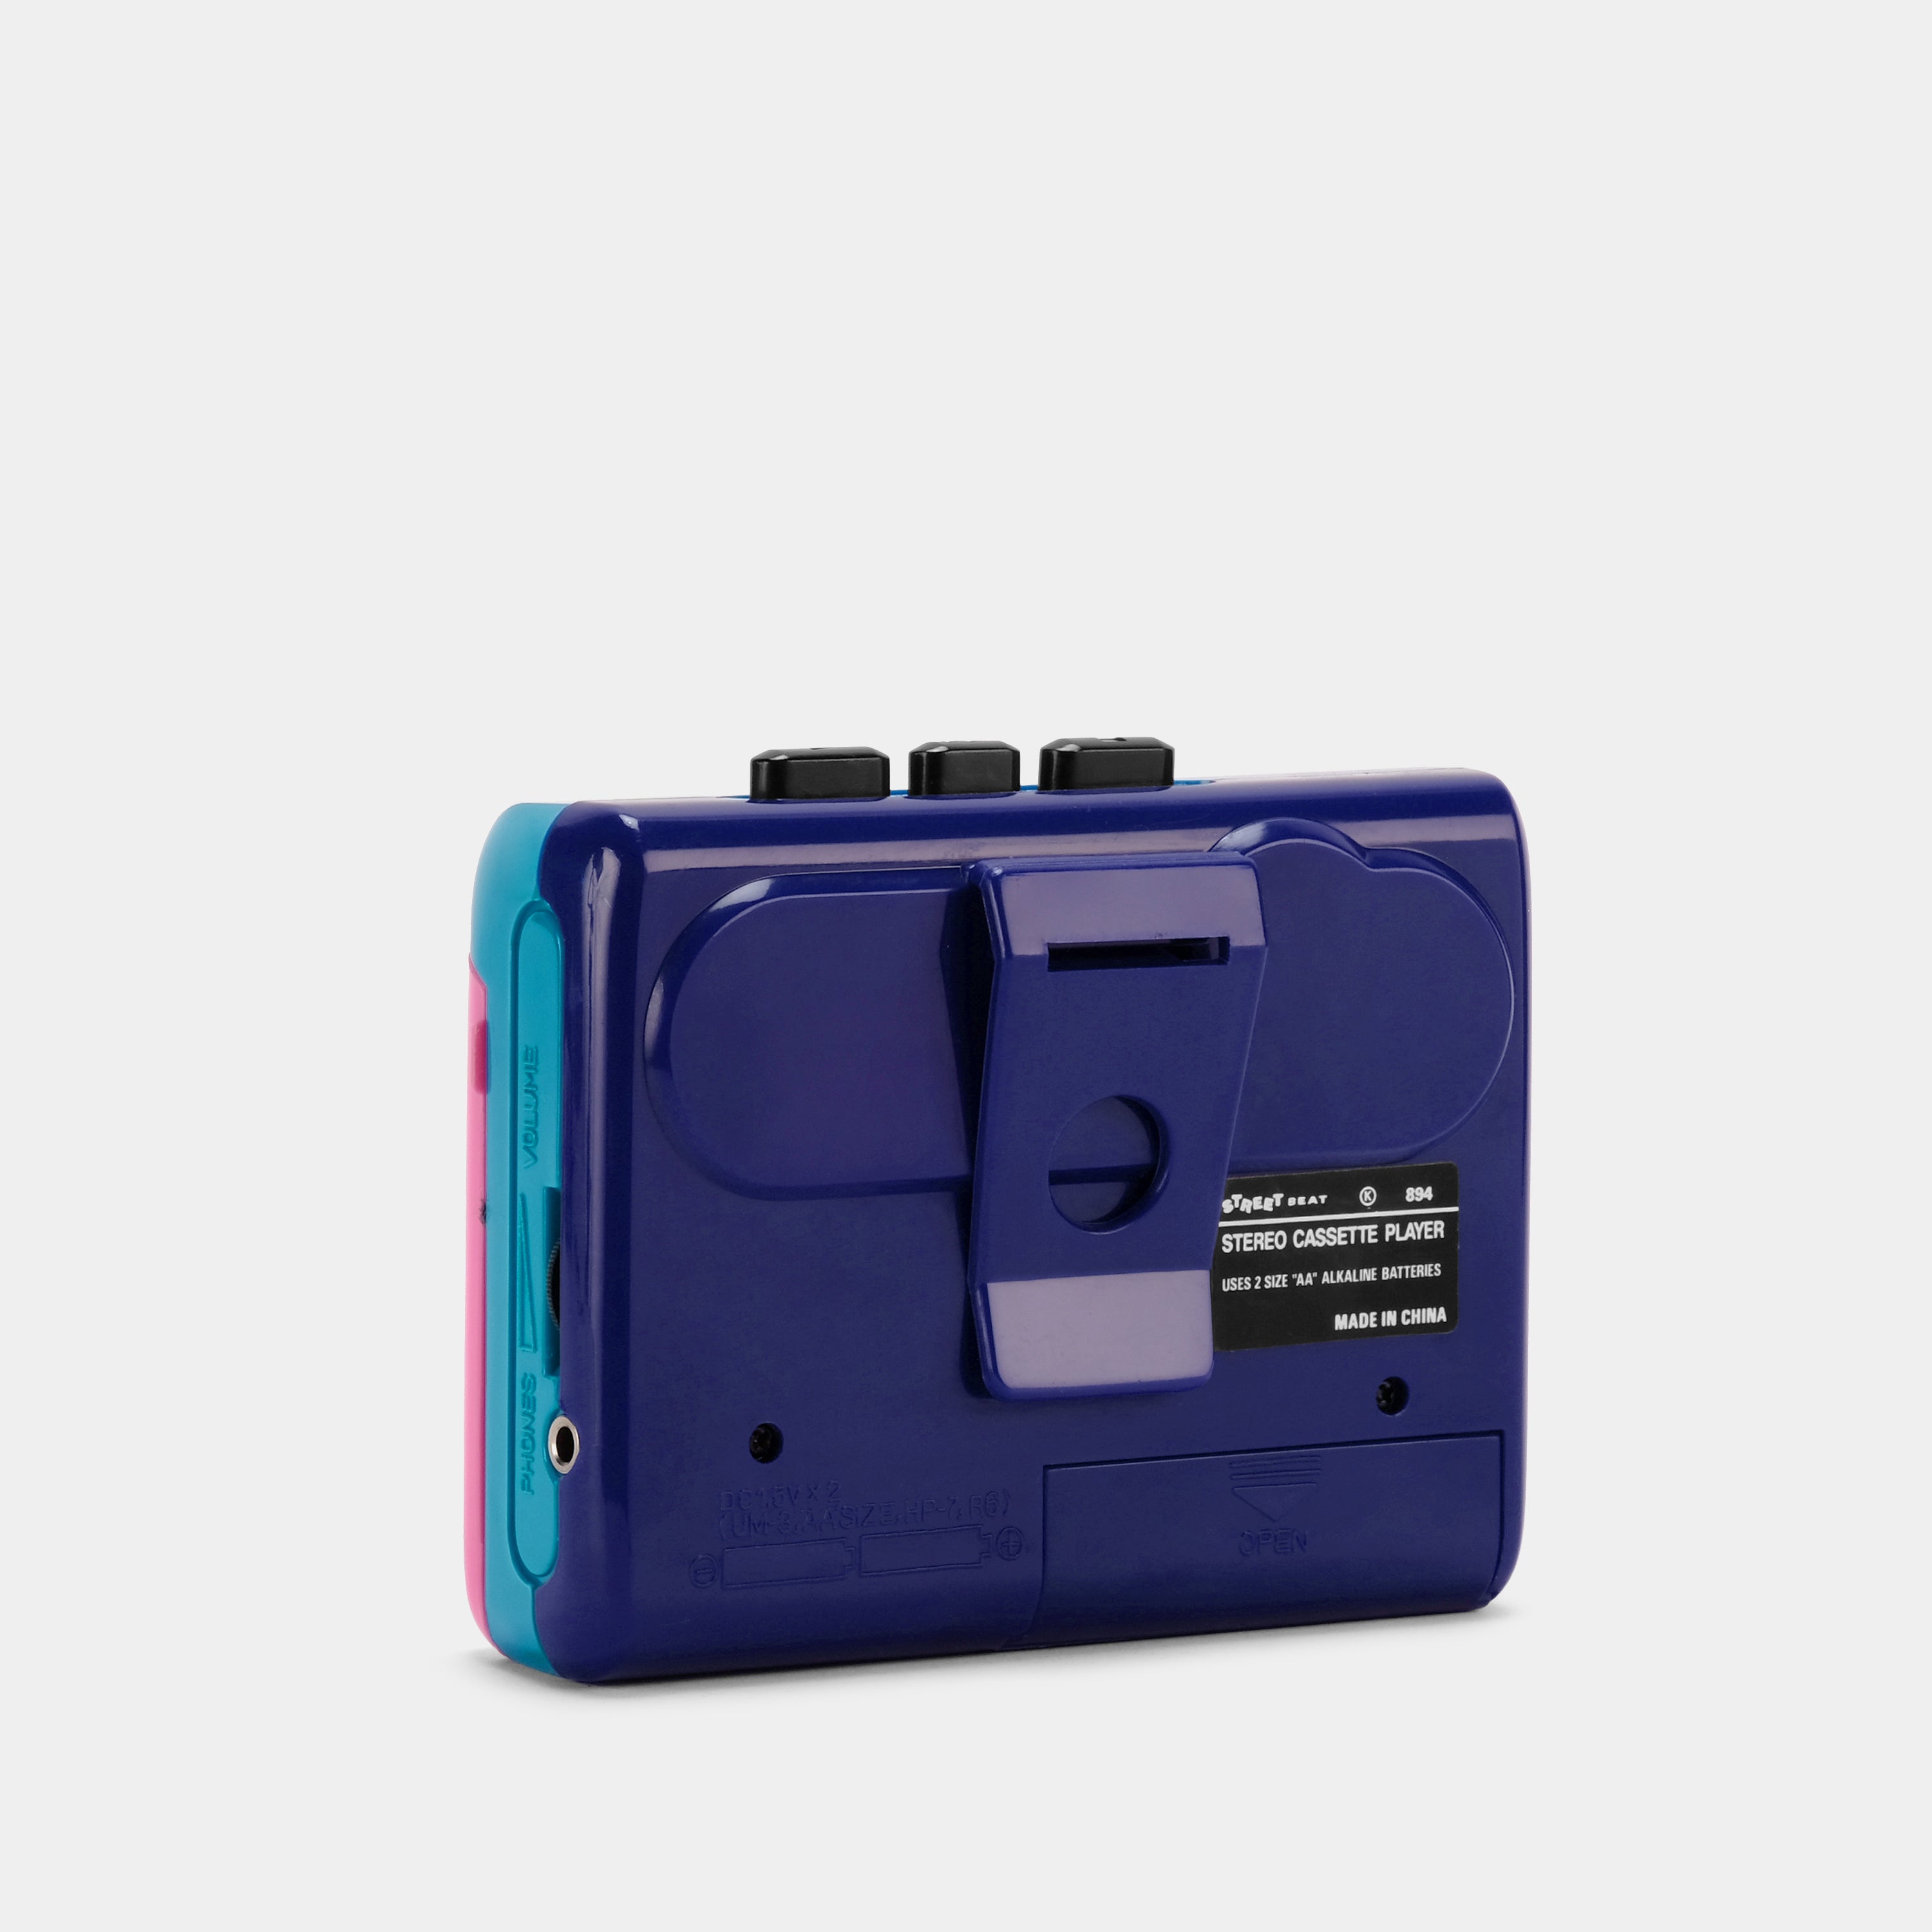 Street Beat Pink, Teal and Purple Portable Cassette Player